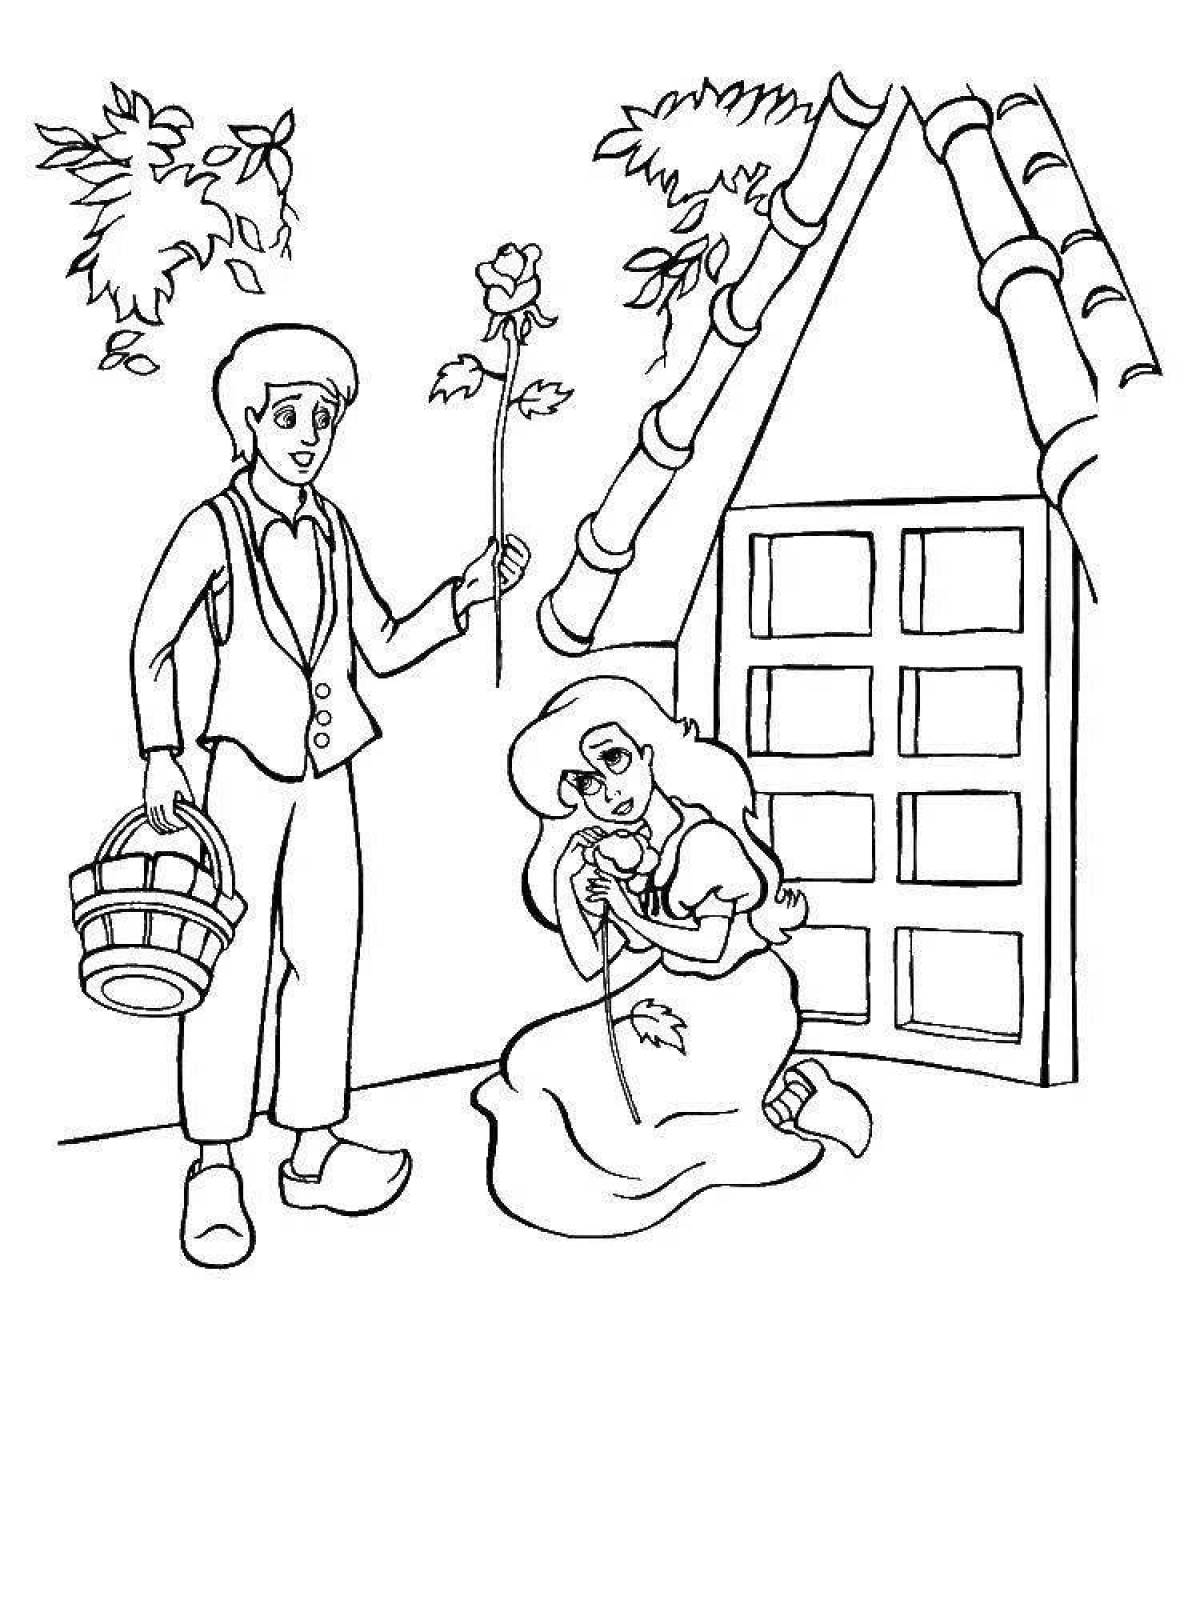 Exalted kai and gerda coloring page